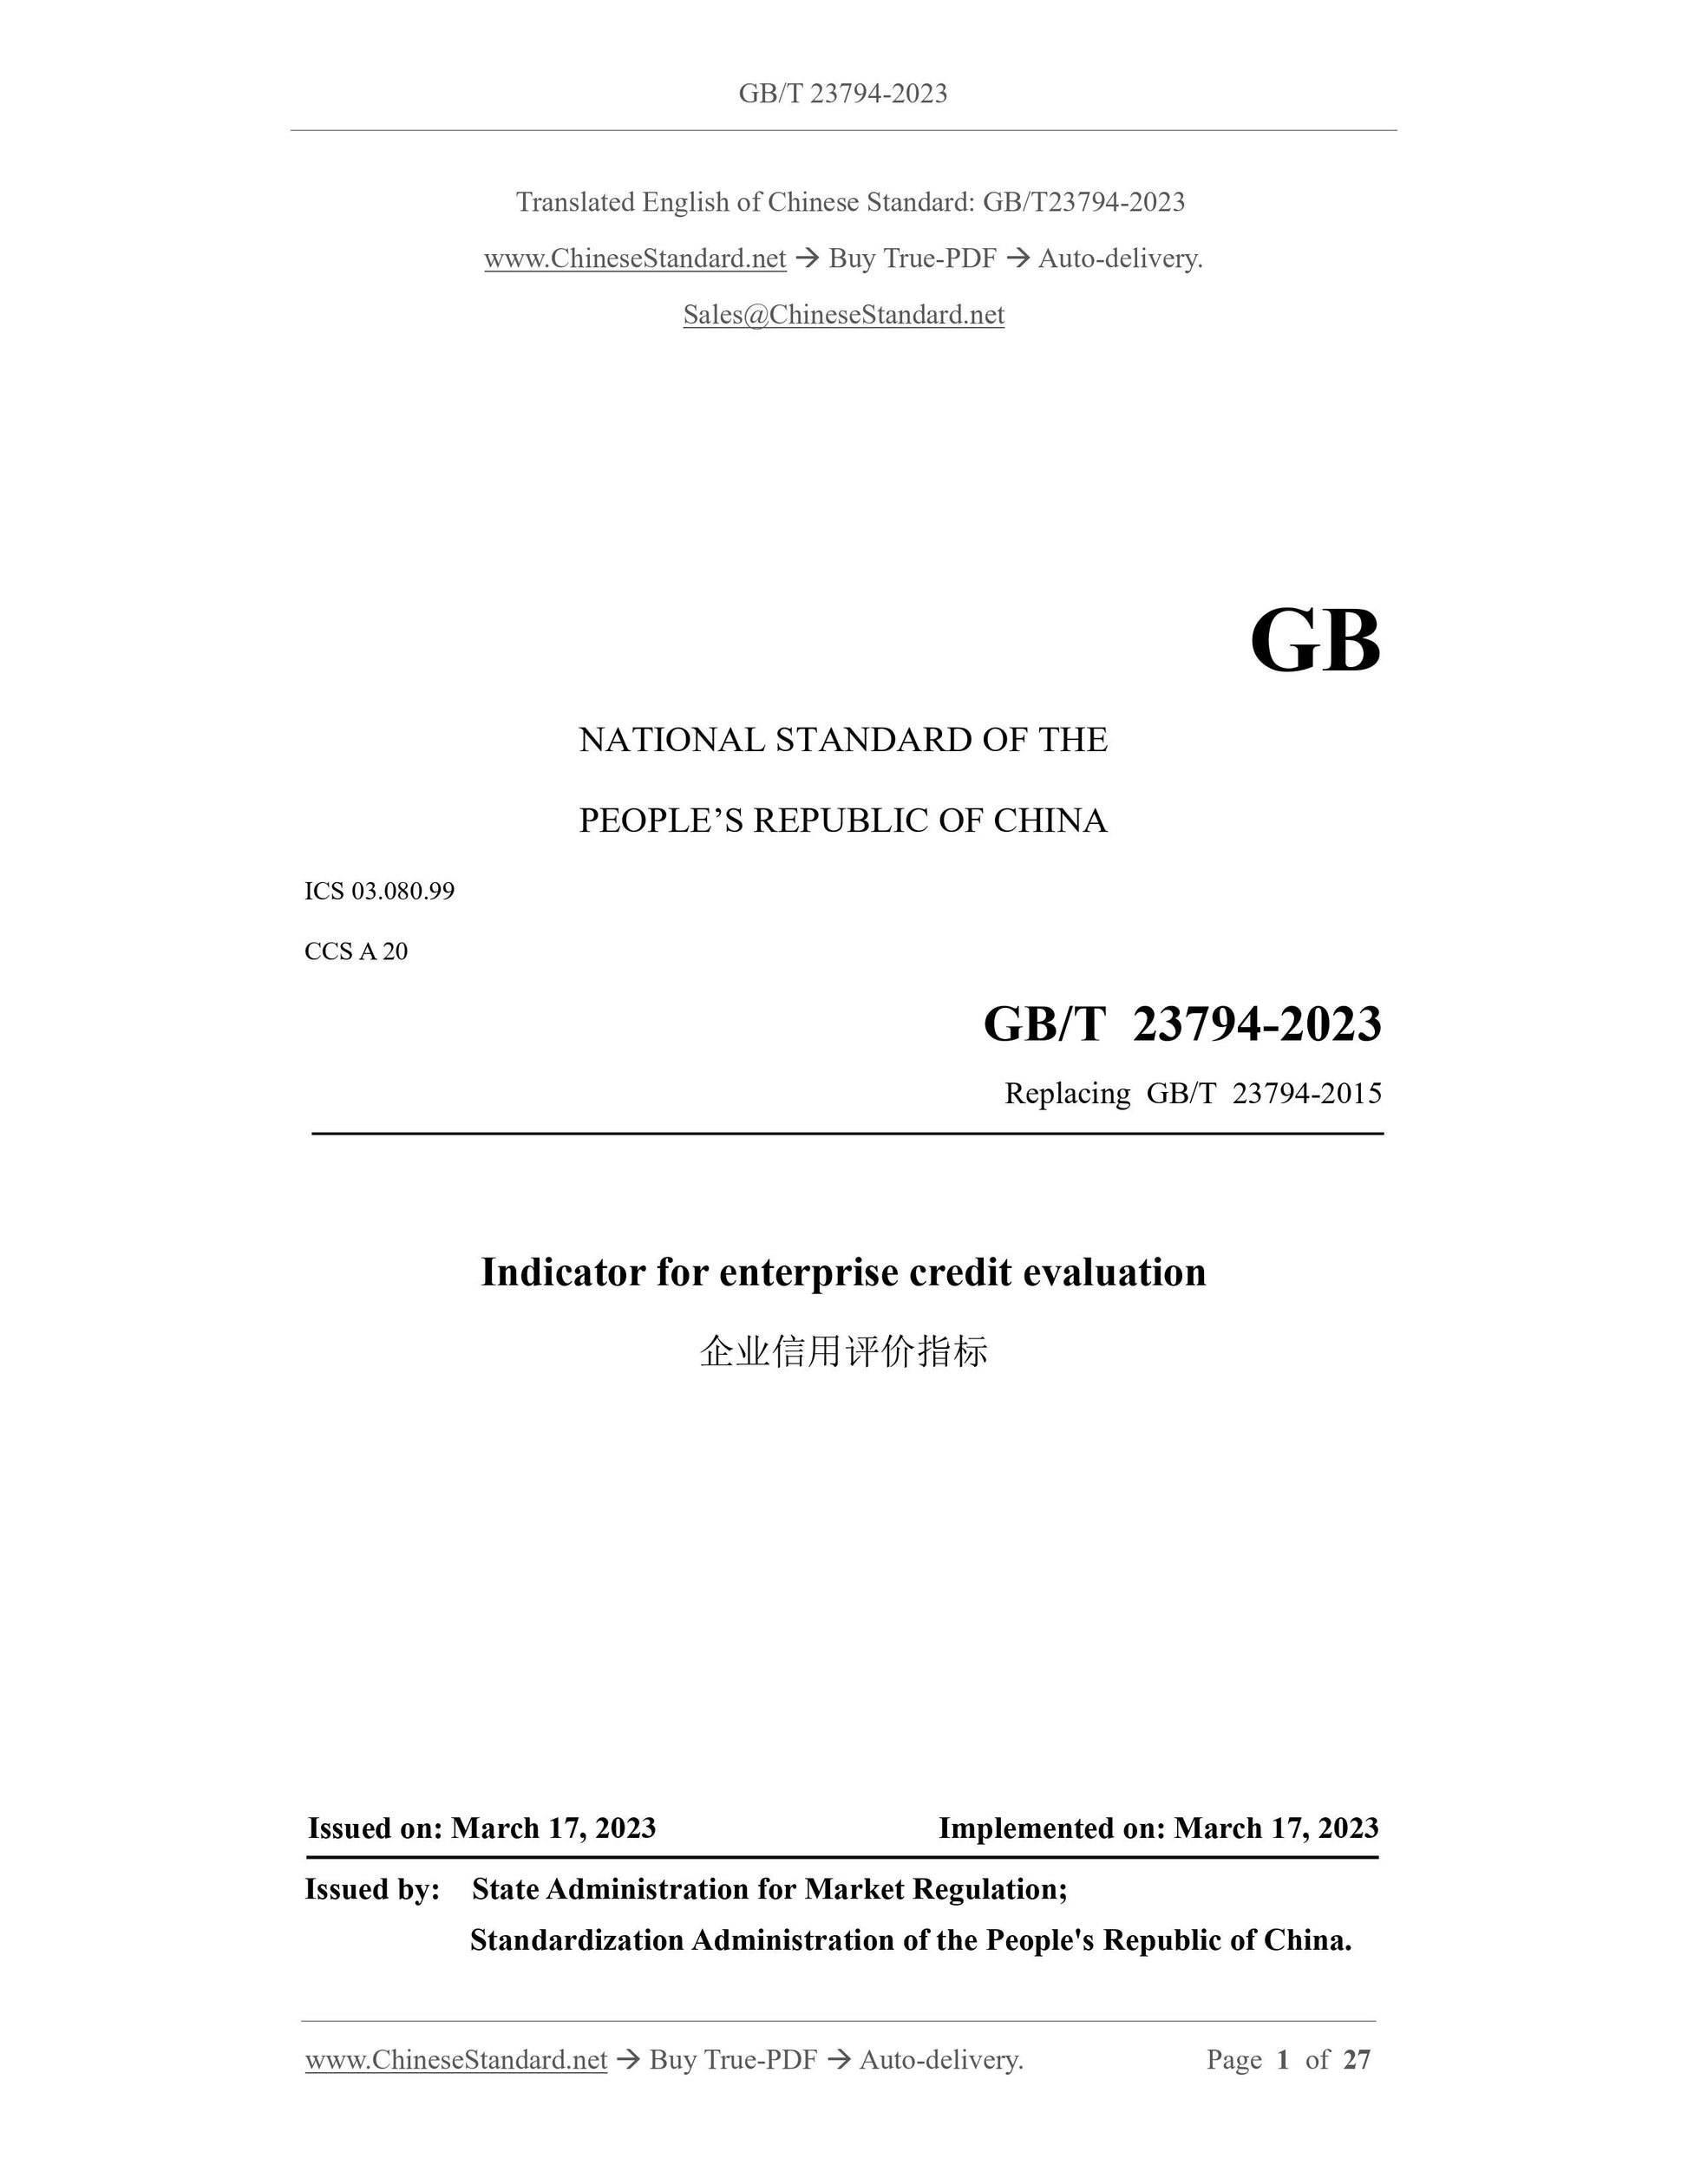 GB/T 23794-2023 Page 1